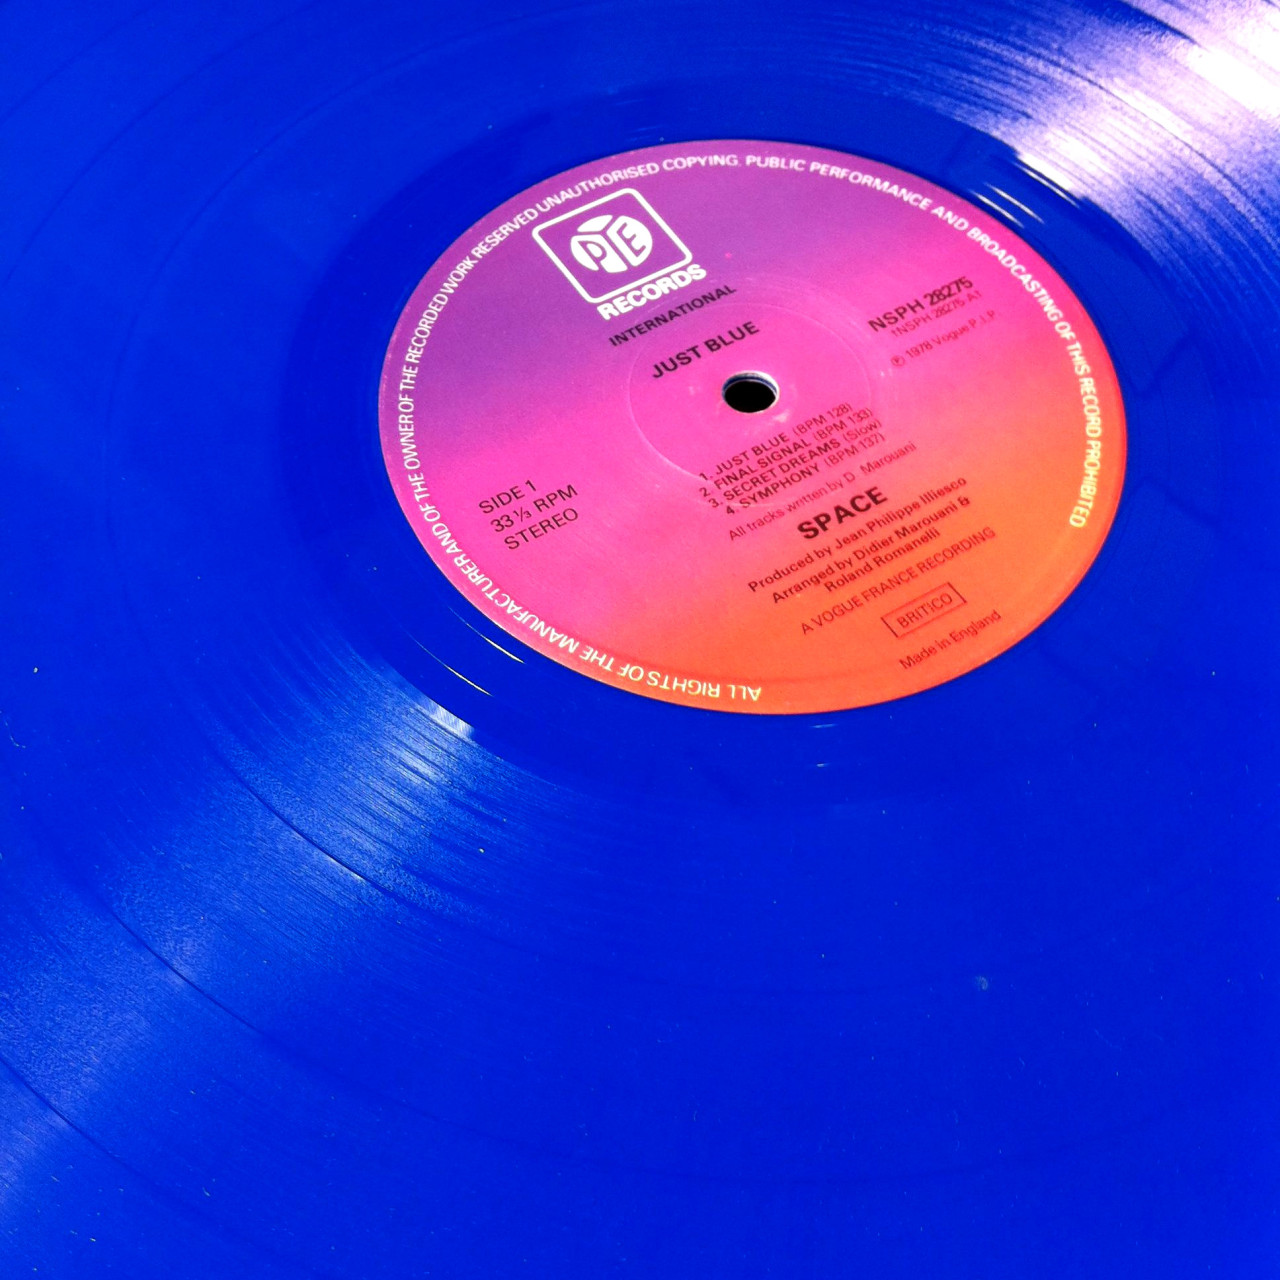 Blue vinyl edition of Just Blue, by Space (Casablanca, 1979). From a charity shop